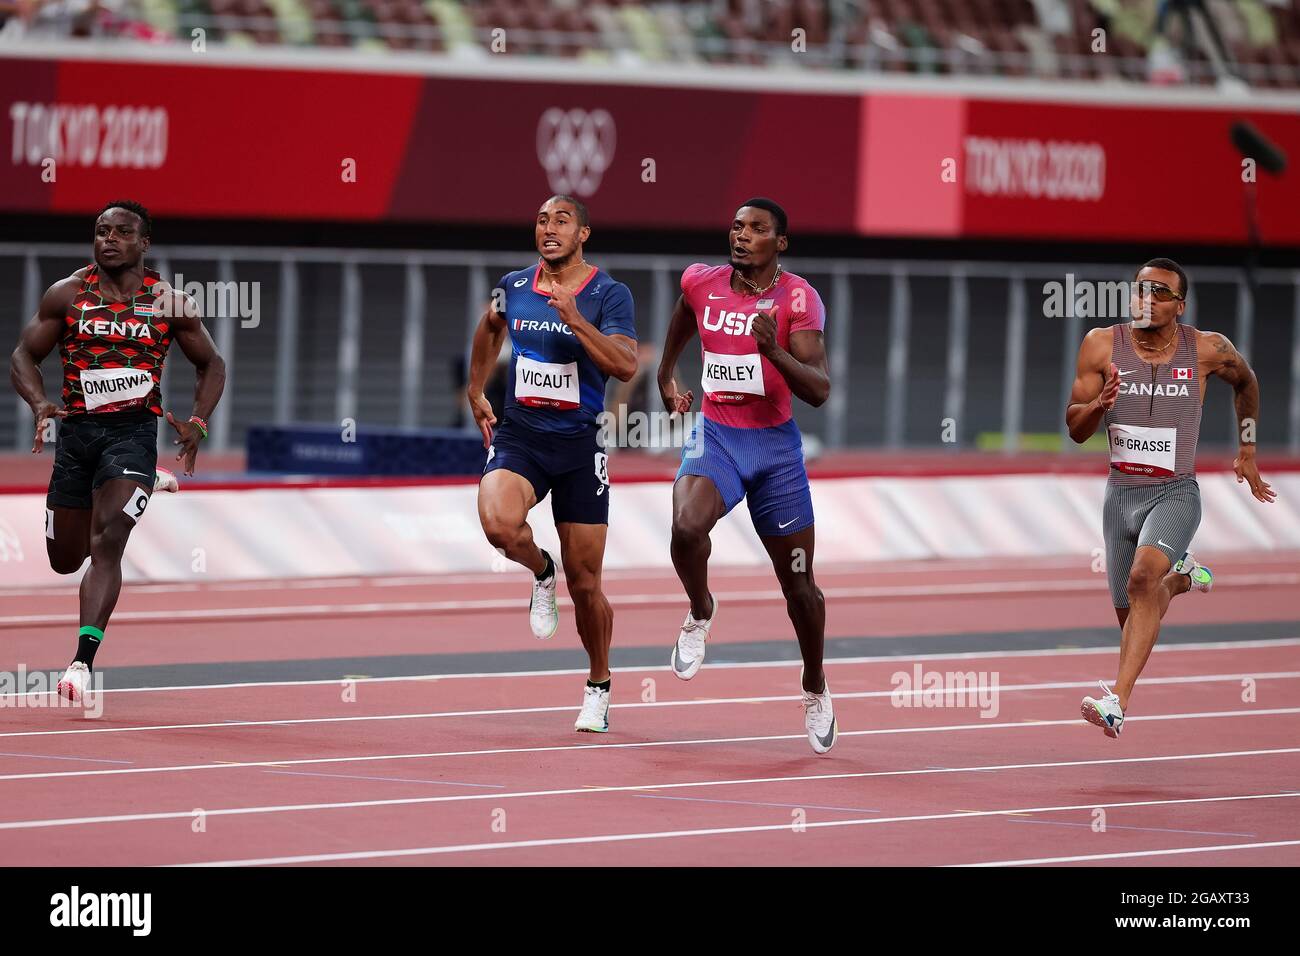 Tokyo, Japan, 1 August, 2021. From left to right, Ferdinand Omurwa of Team Kenya, Jimmy Vicaut of Team France, Fred Kerley of Team United States and Andre De Grasse of Team Canada in action during the Men's 100m Semifinal on Day 9 of the Tokyo 2020 Olympic Games . Credit: Pete Dovgan/Speed Media/Alamy Live News Stock Photo